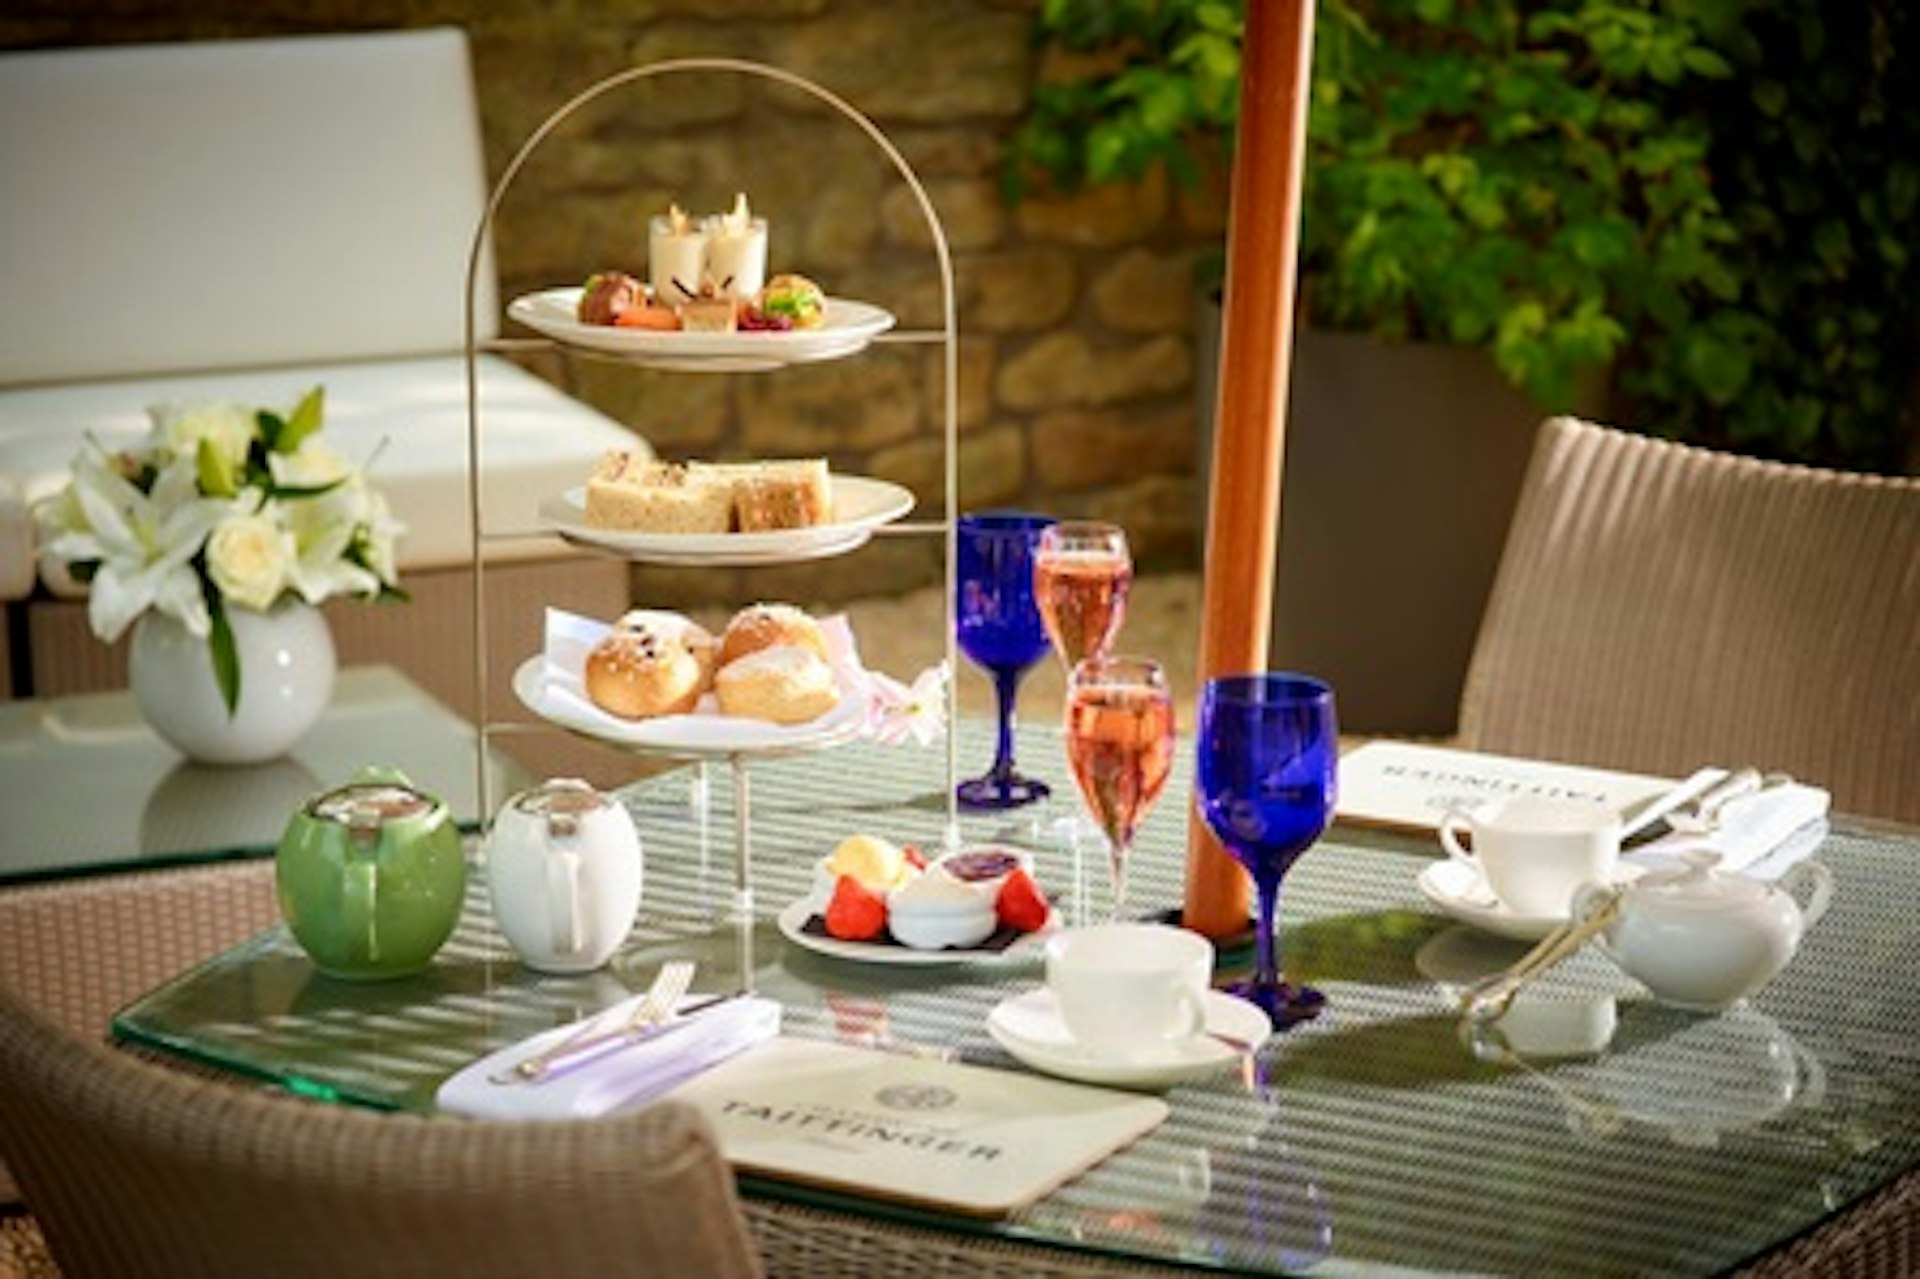 Visit to Roman Baths with Afternoon Tea at the 5* Royal Crescent Hotel & Spa for Two 3